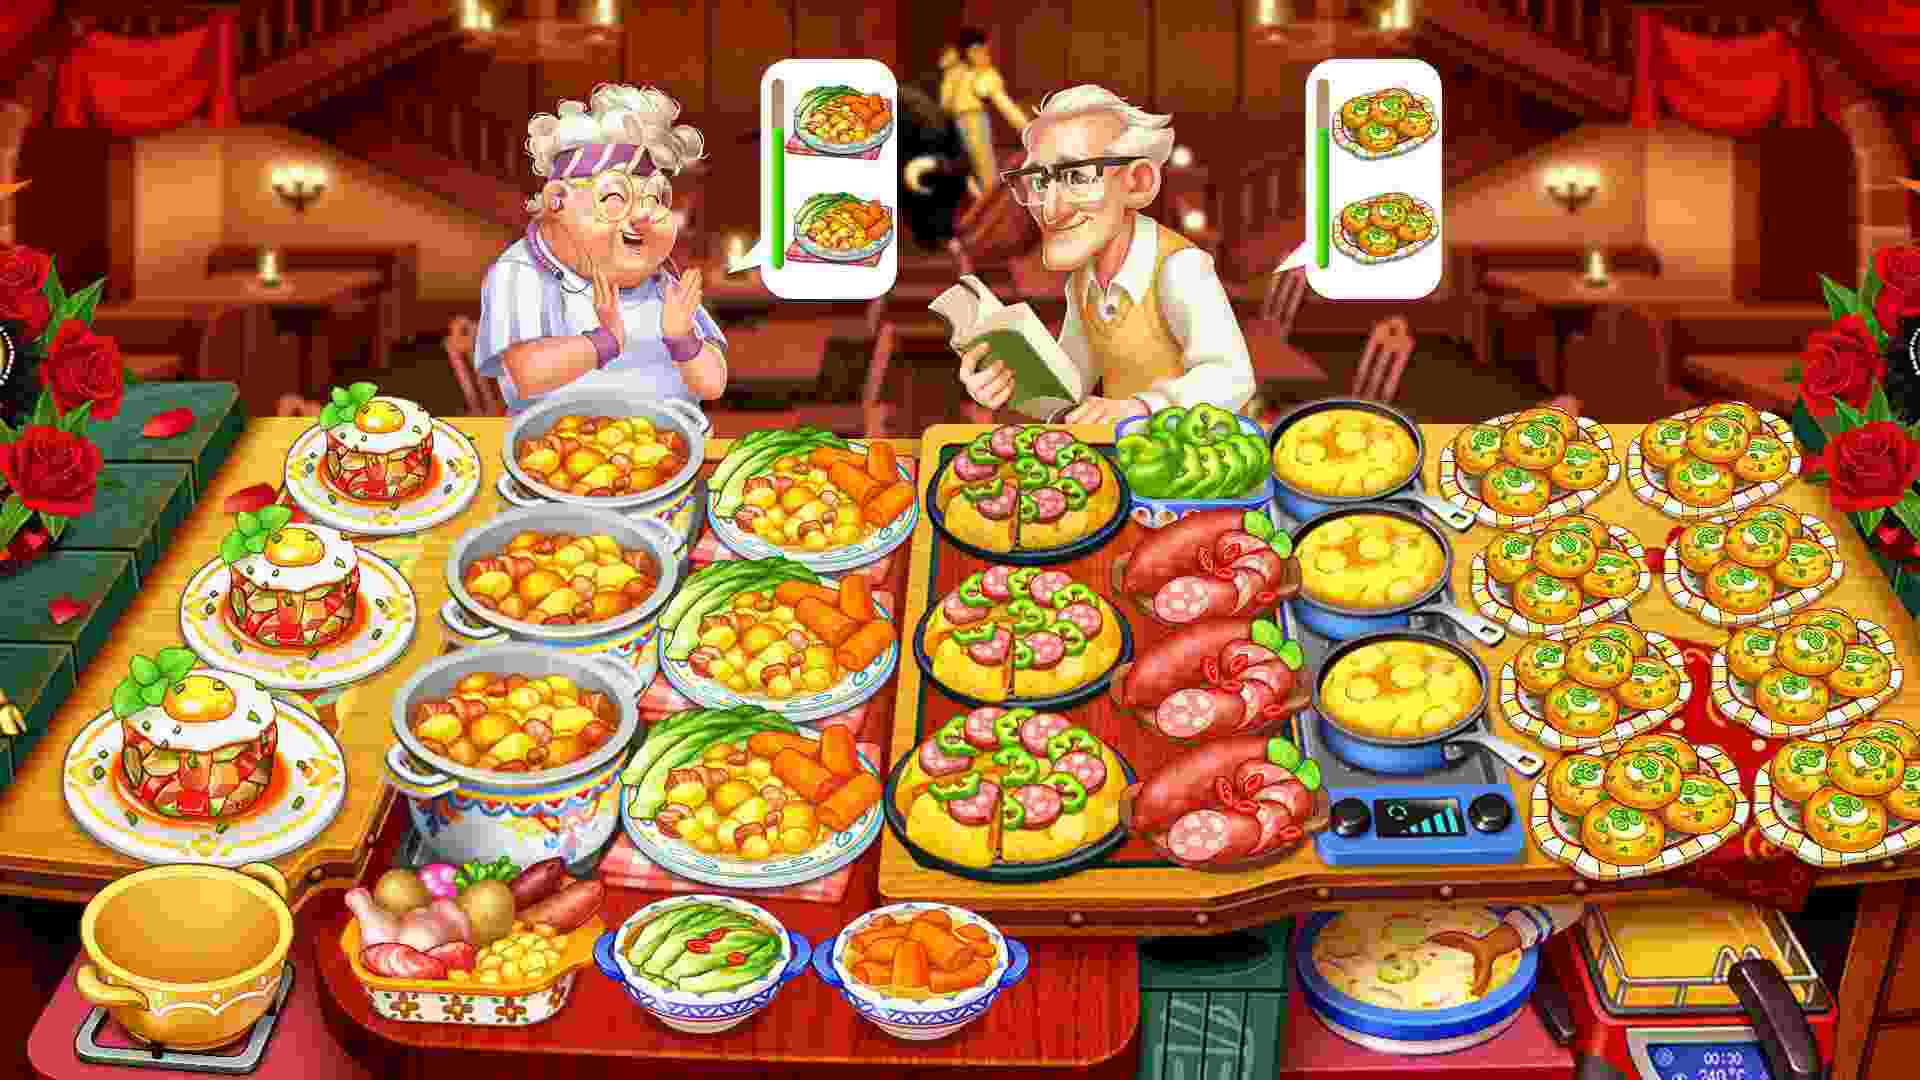 Cooking Frenzy mod apk